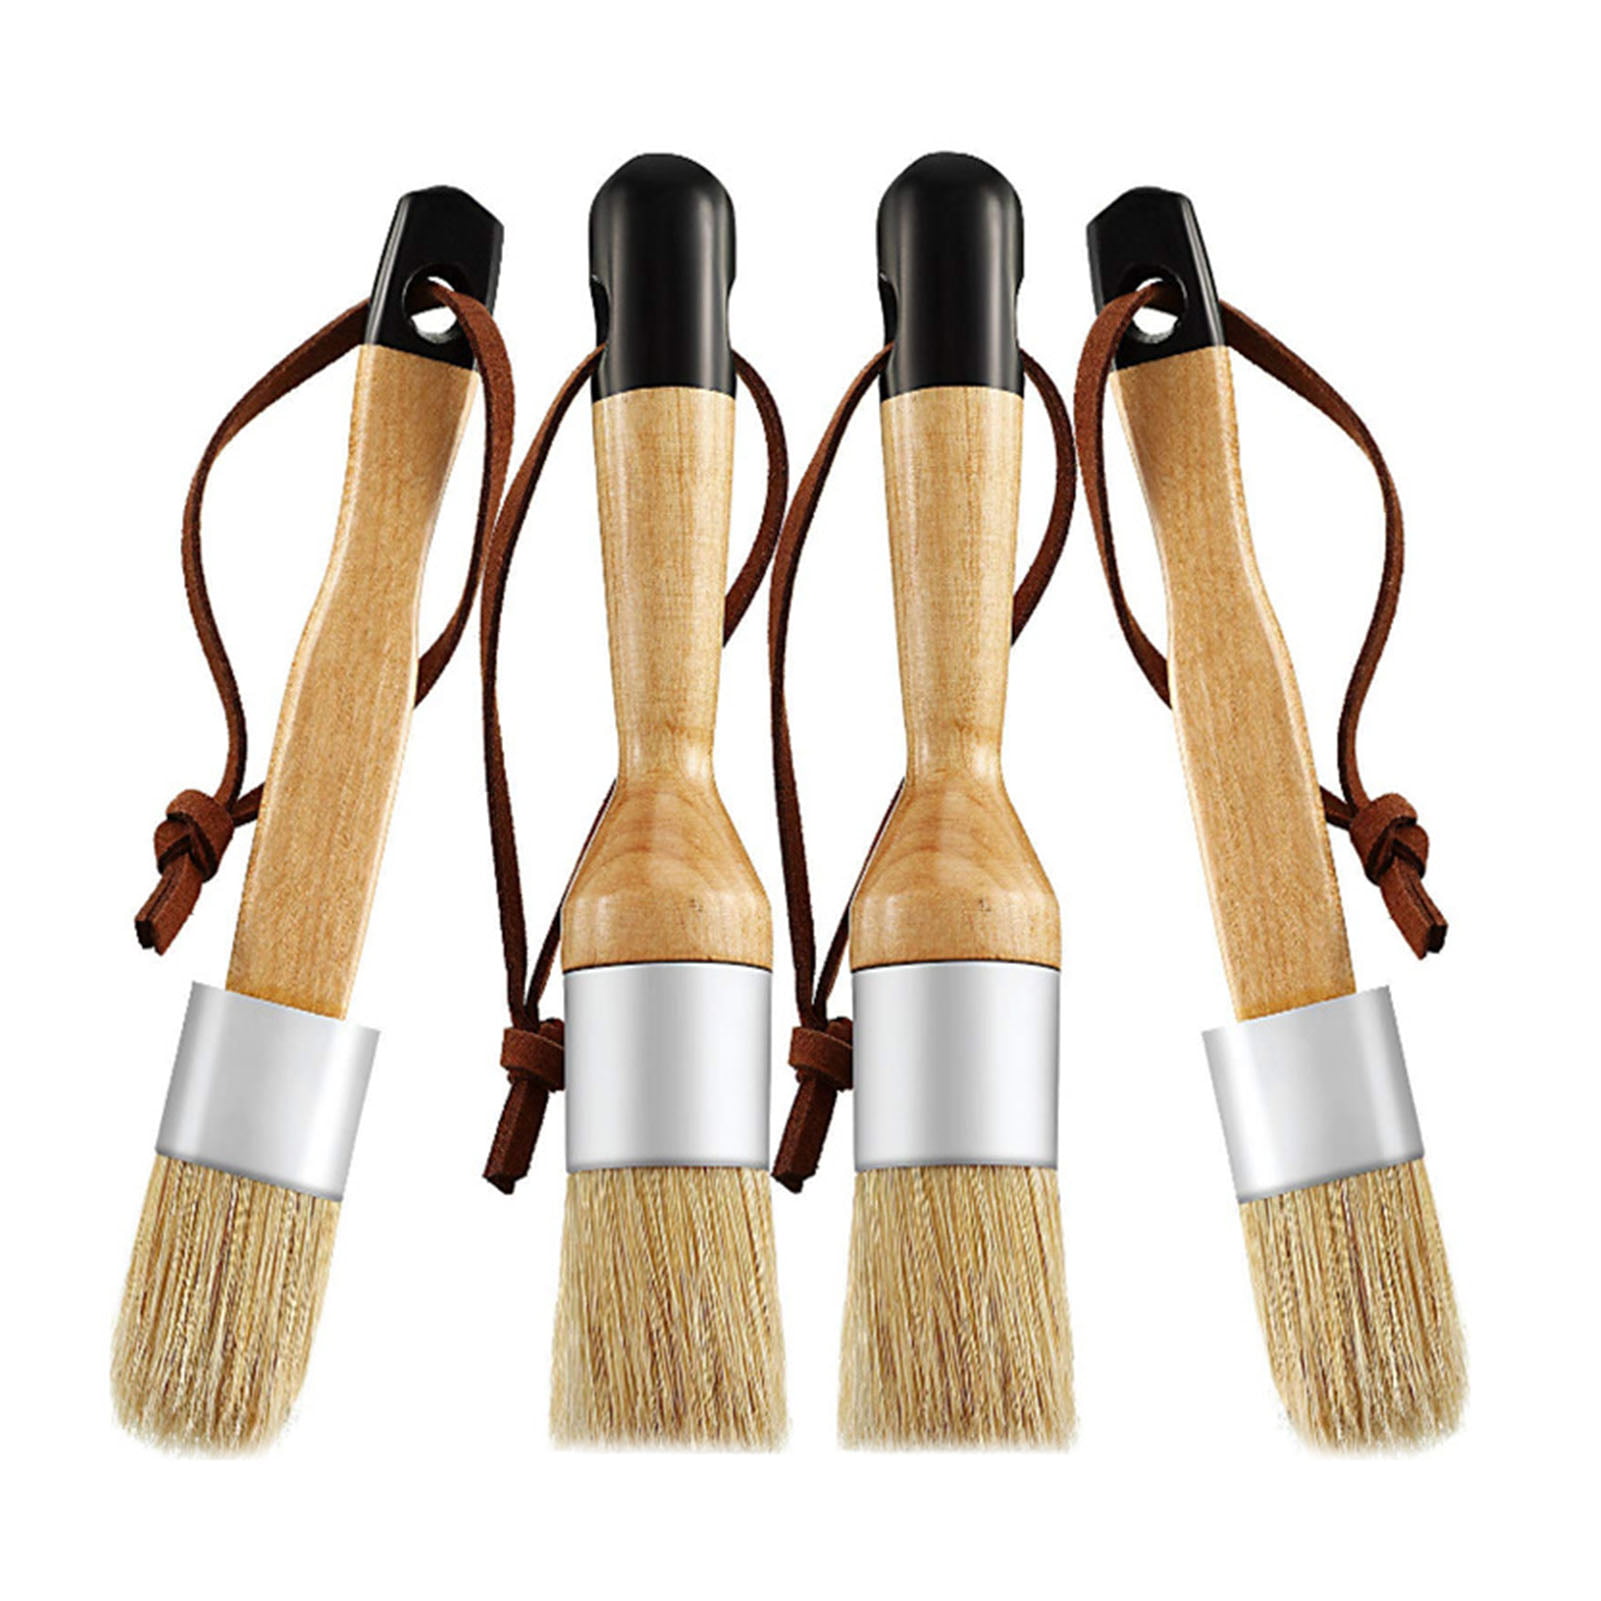 Chalk Wax Paint Brush 5PCs set including 3 small paint brushes for